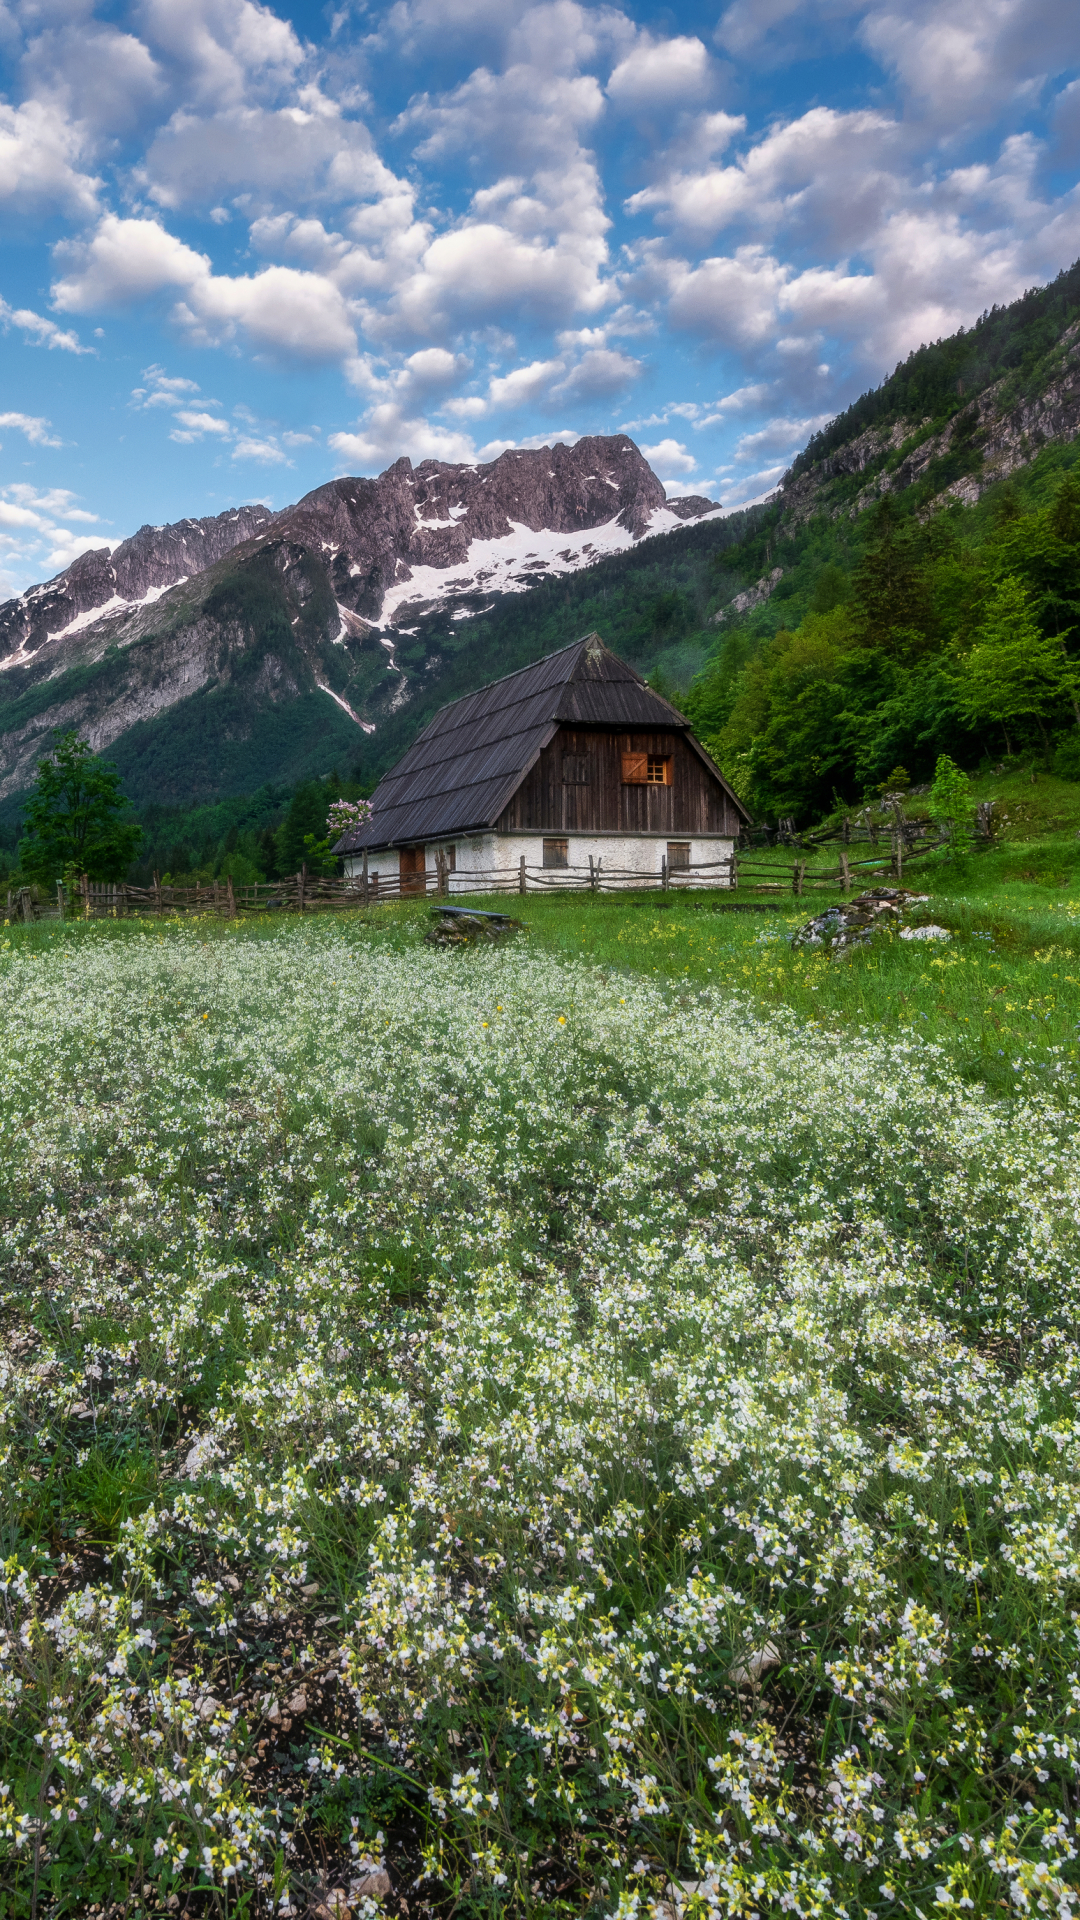 Tiny house in Mountain Meadow by Aleš Krivec